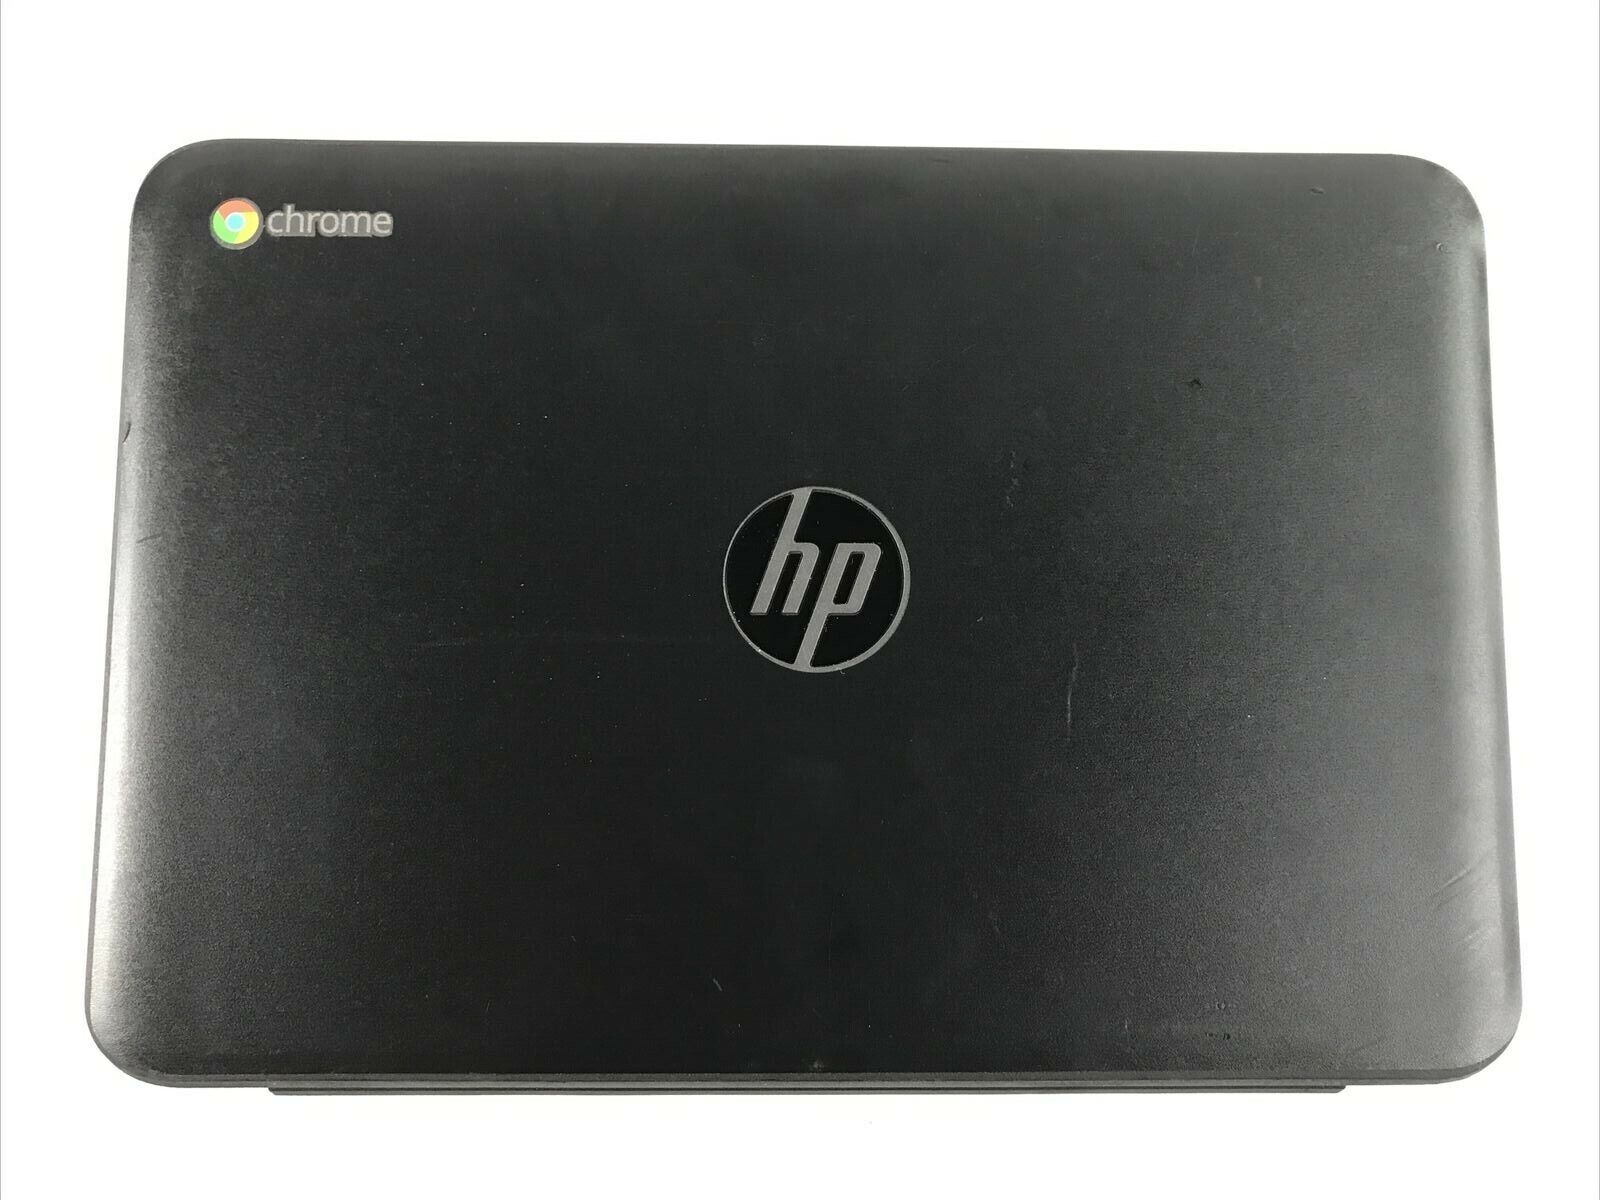 HP Chromebook 11 G4 11.6" Genuine LCD Back Cover 3VY07TPF03AK w/ Hinges